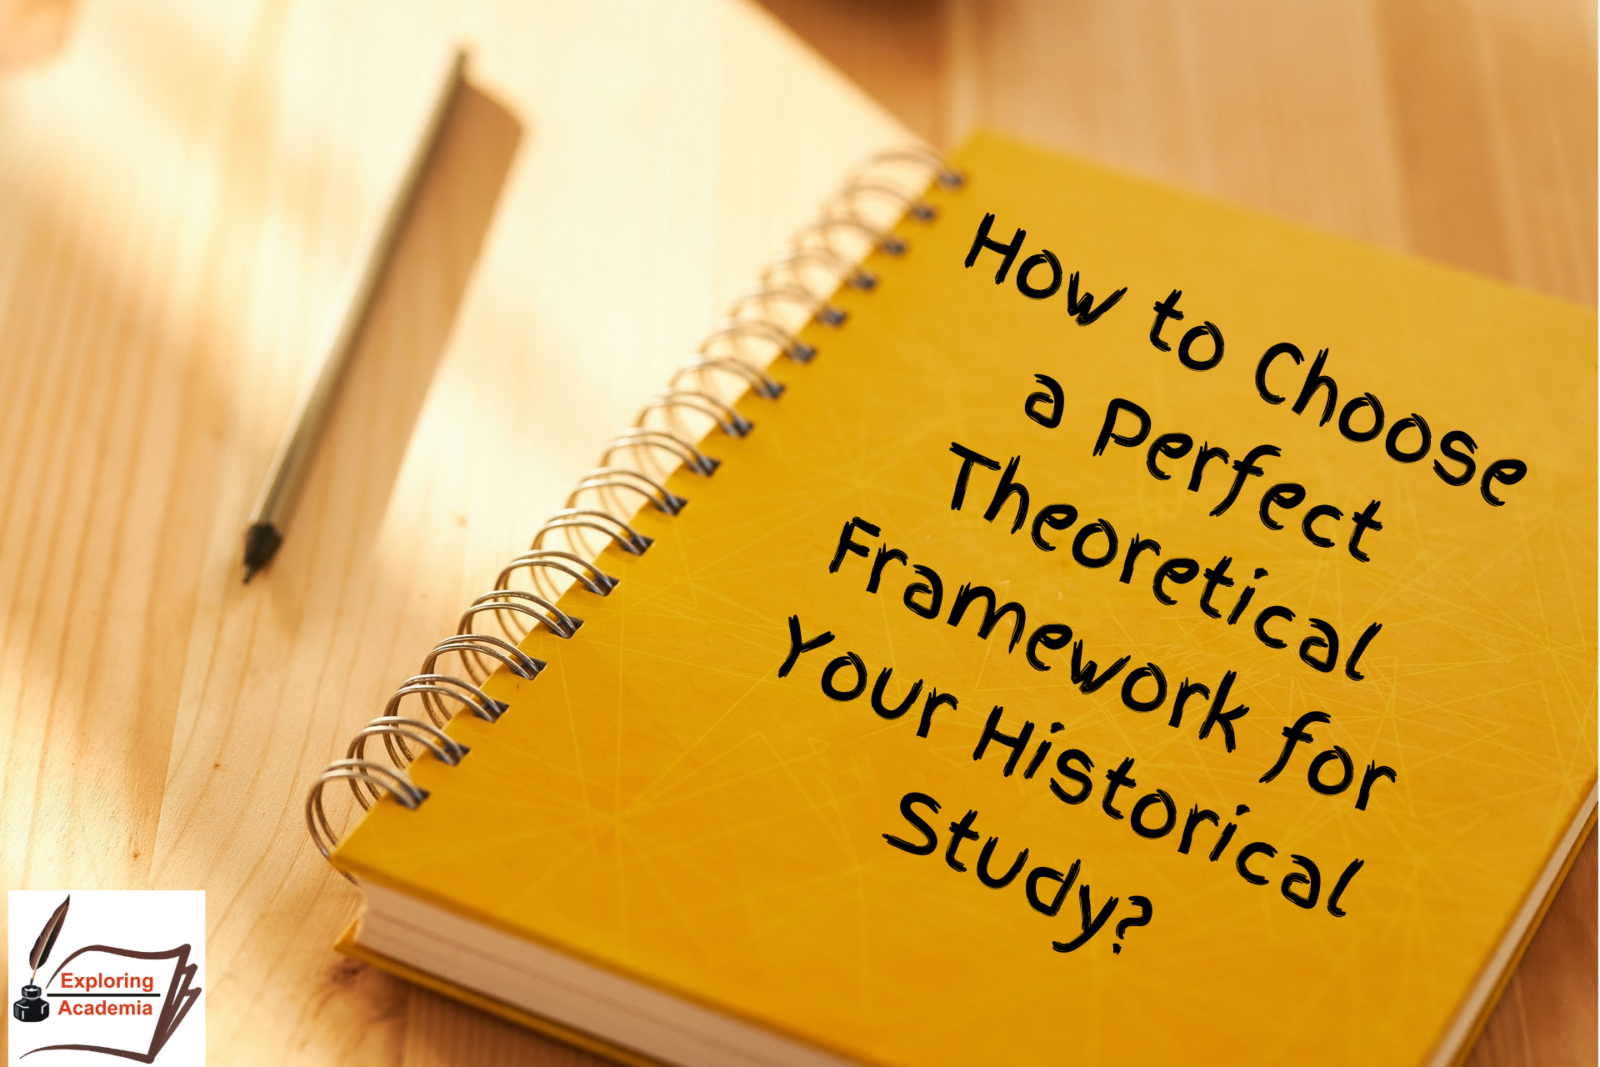 How to Choose a Perfect Theoretical Framework for Your Historical Study?